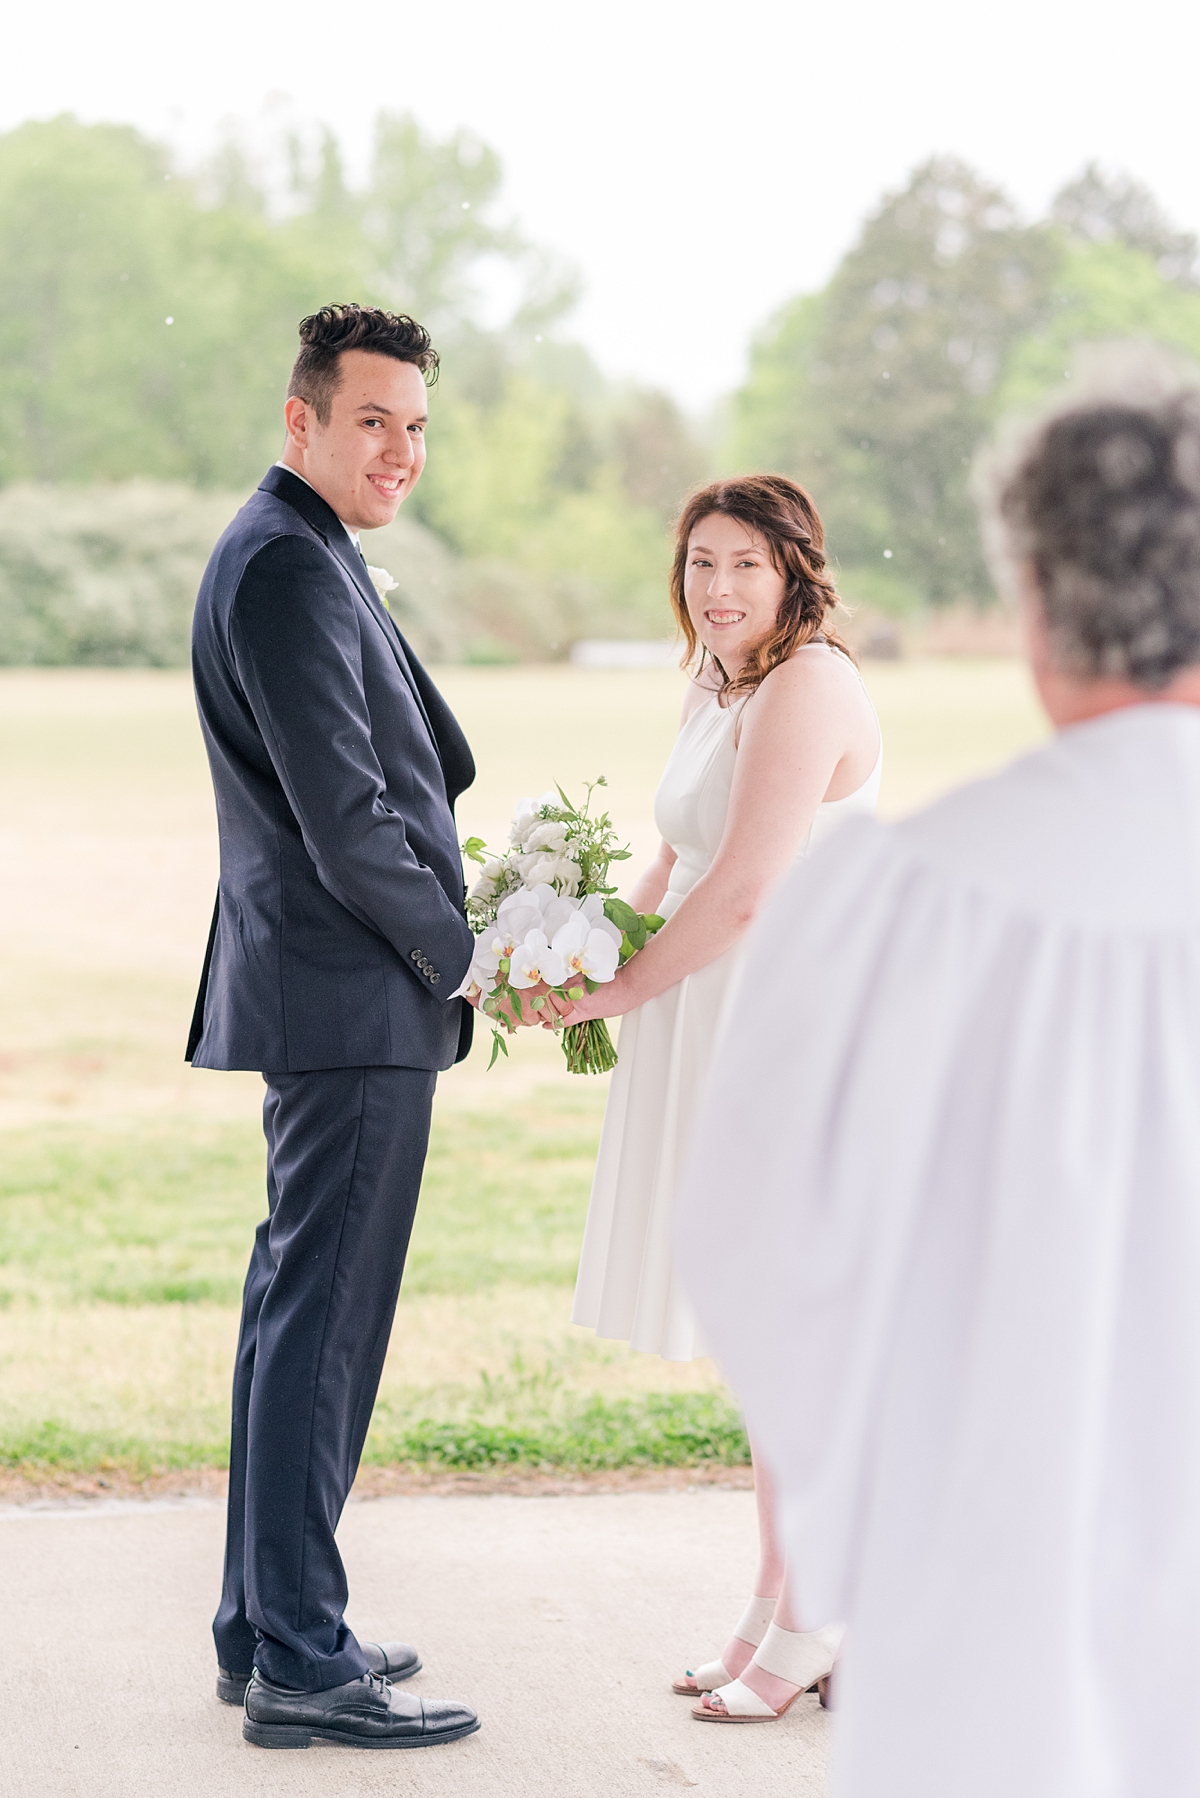 Small Elopement at Hanover Courthouse Park by Richmond Elopement Photographer Kailey Brianne Photography. 